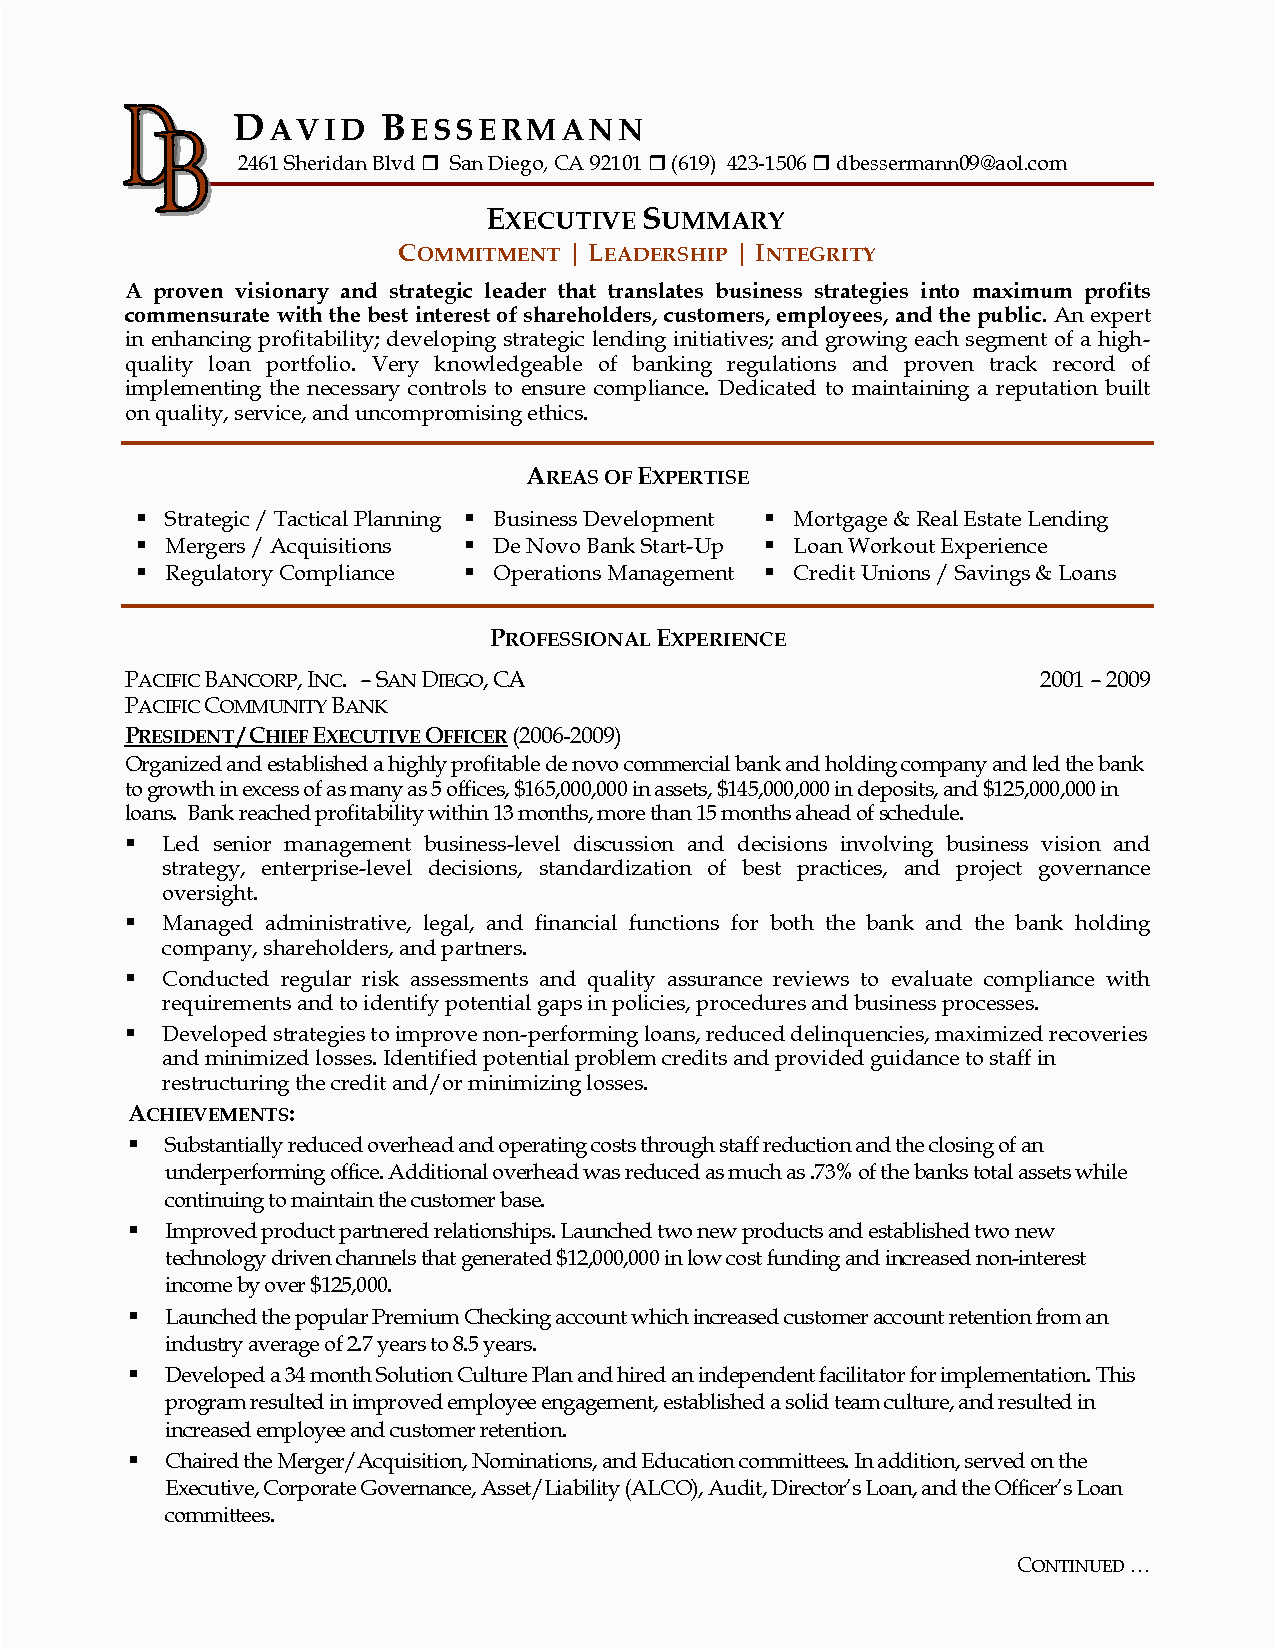 Samples Of Executive Summary for Resume C Suite